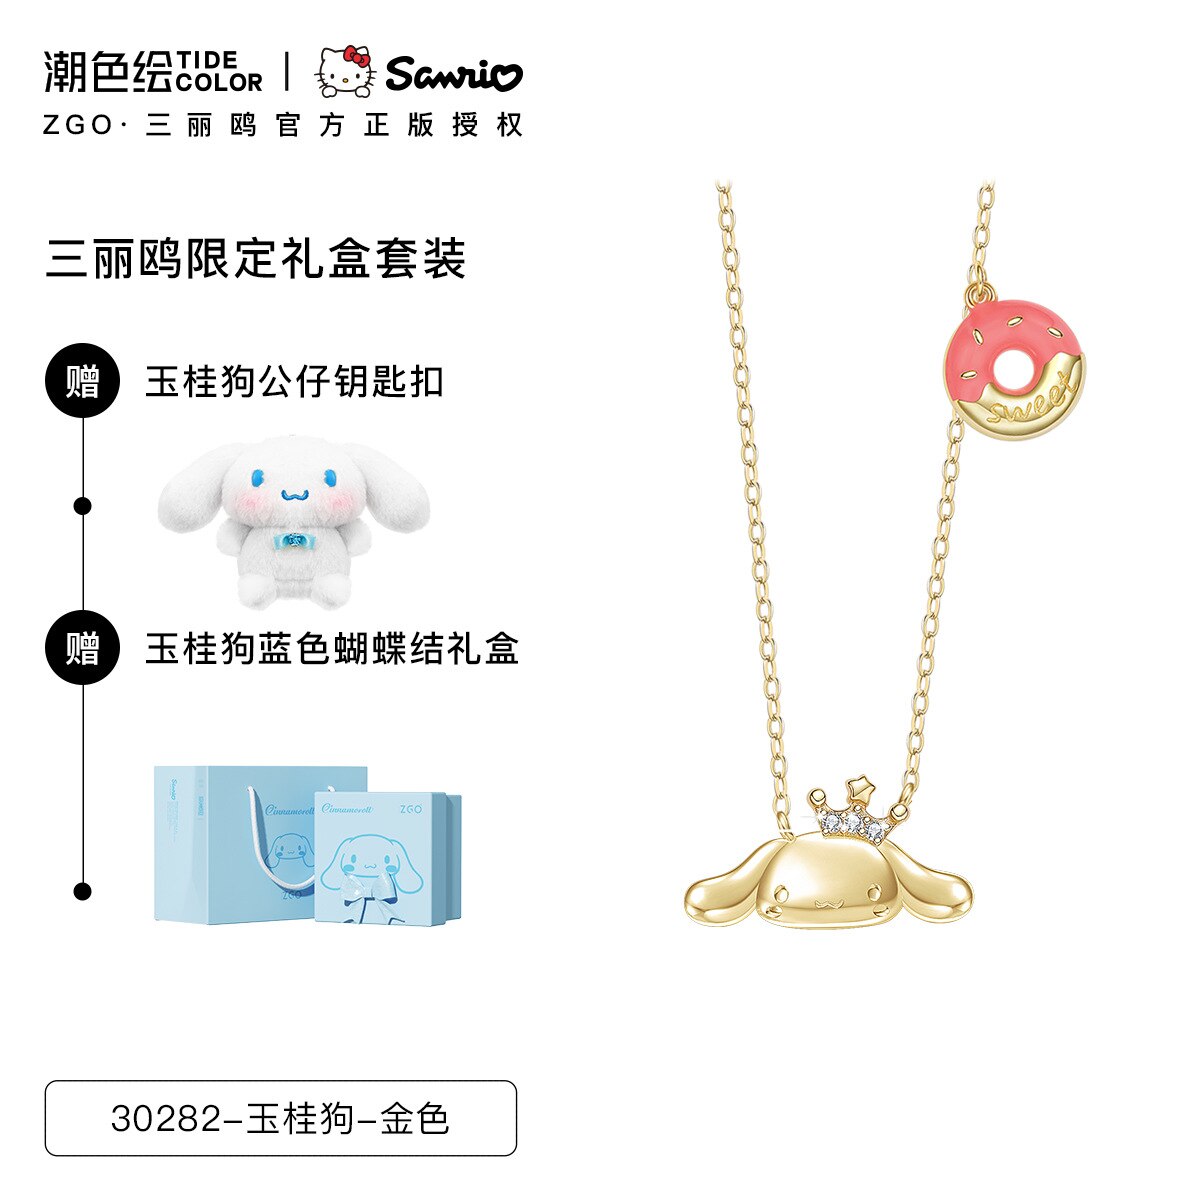 THE KISS Cinnamoroll Silver Necklace 20th Sanrio Japan With Box –